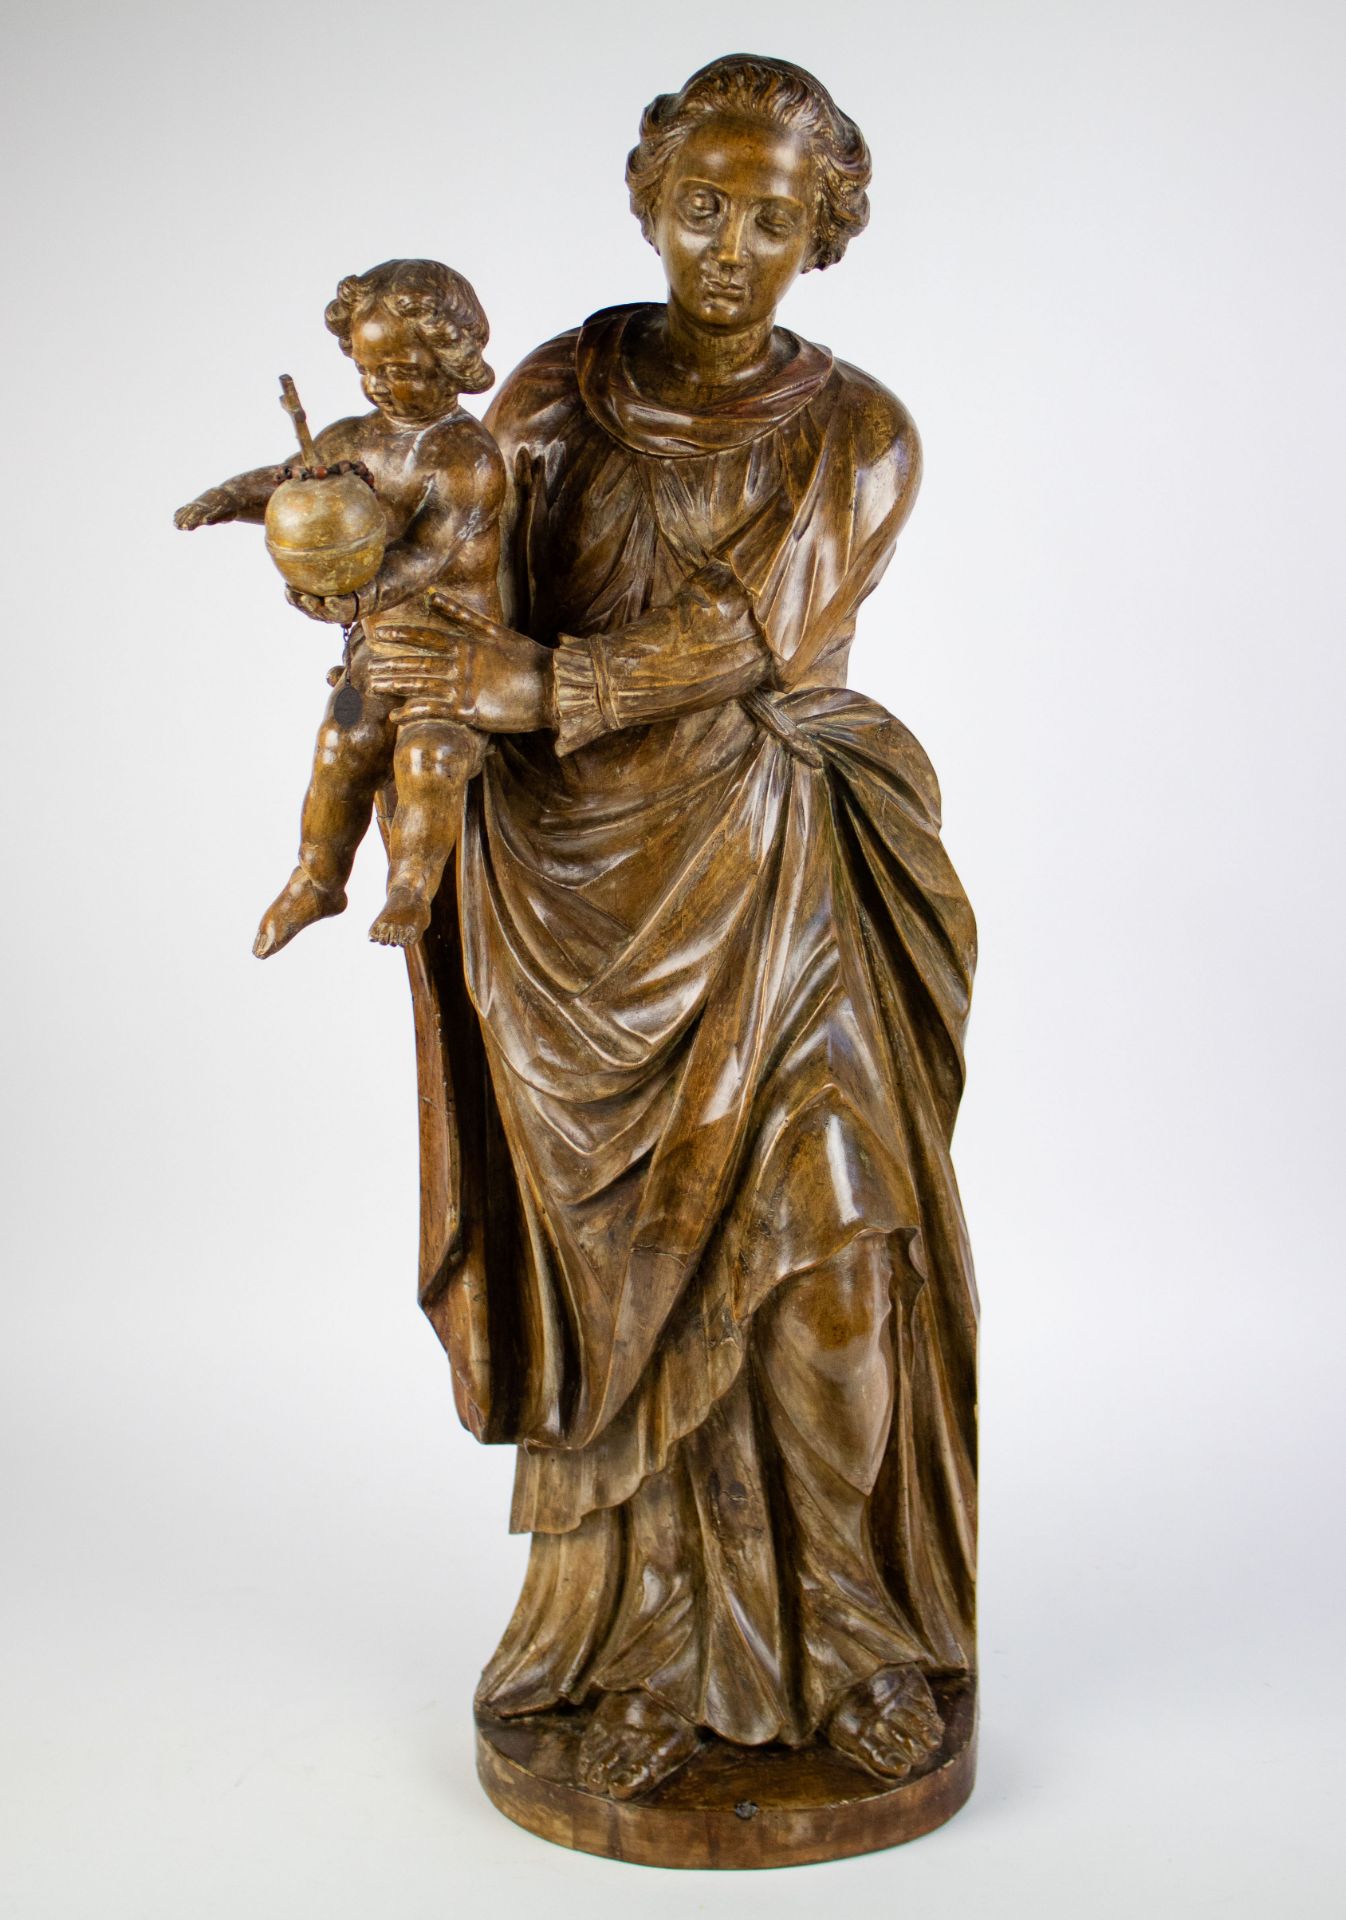 Statue of Virgin Mary carrying Jesus, with globe in his hand